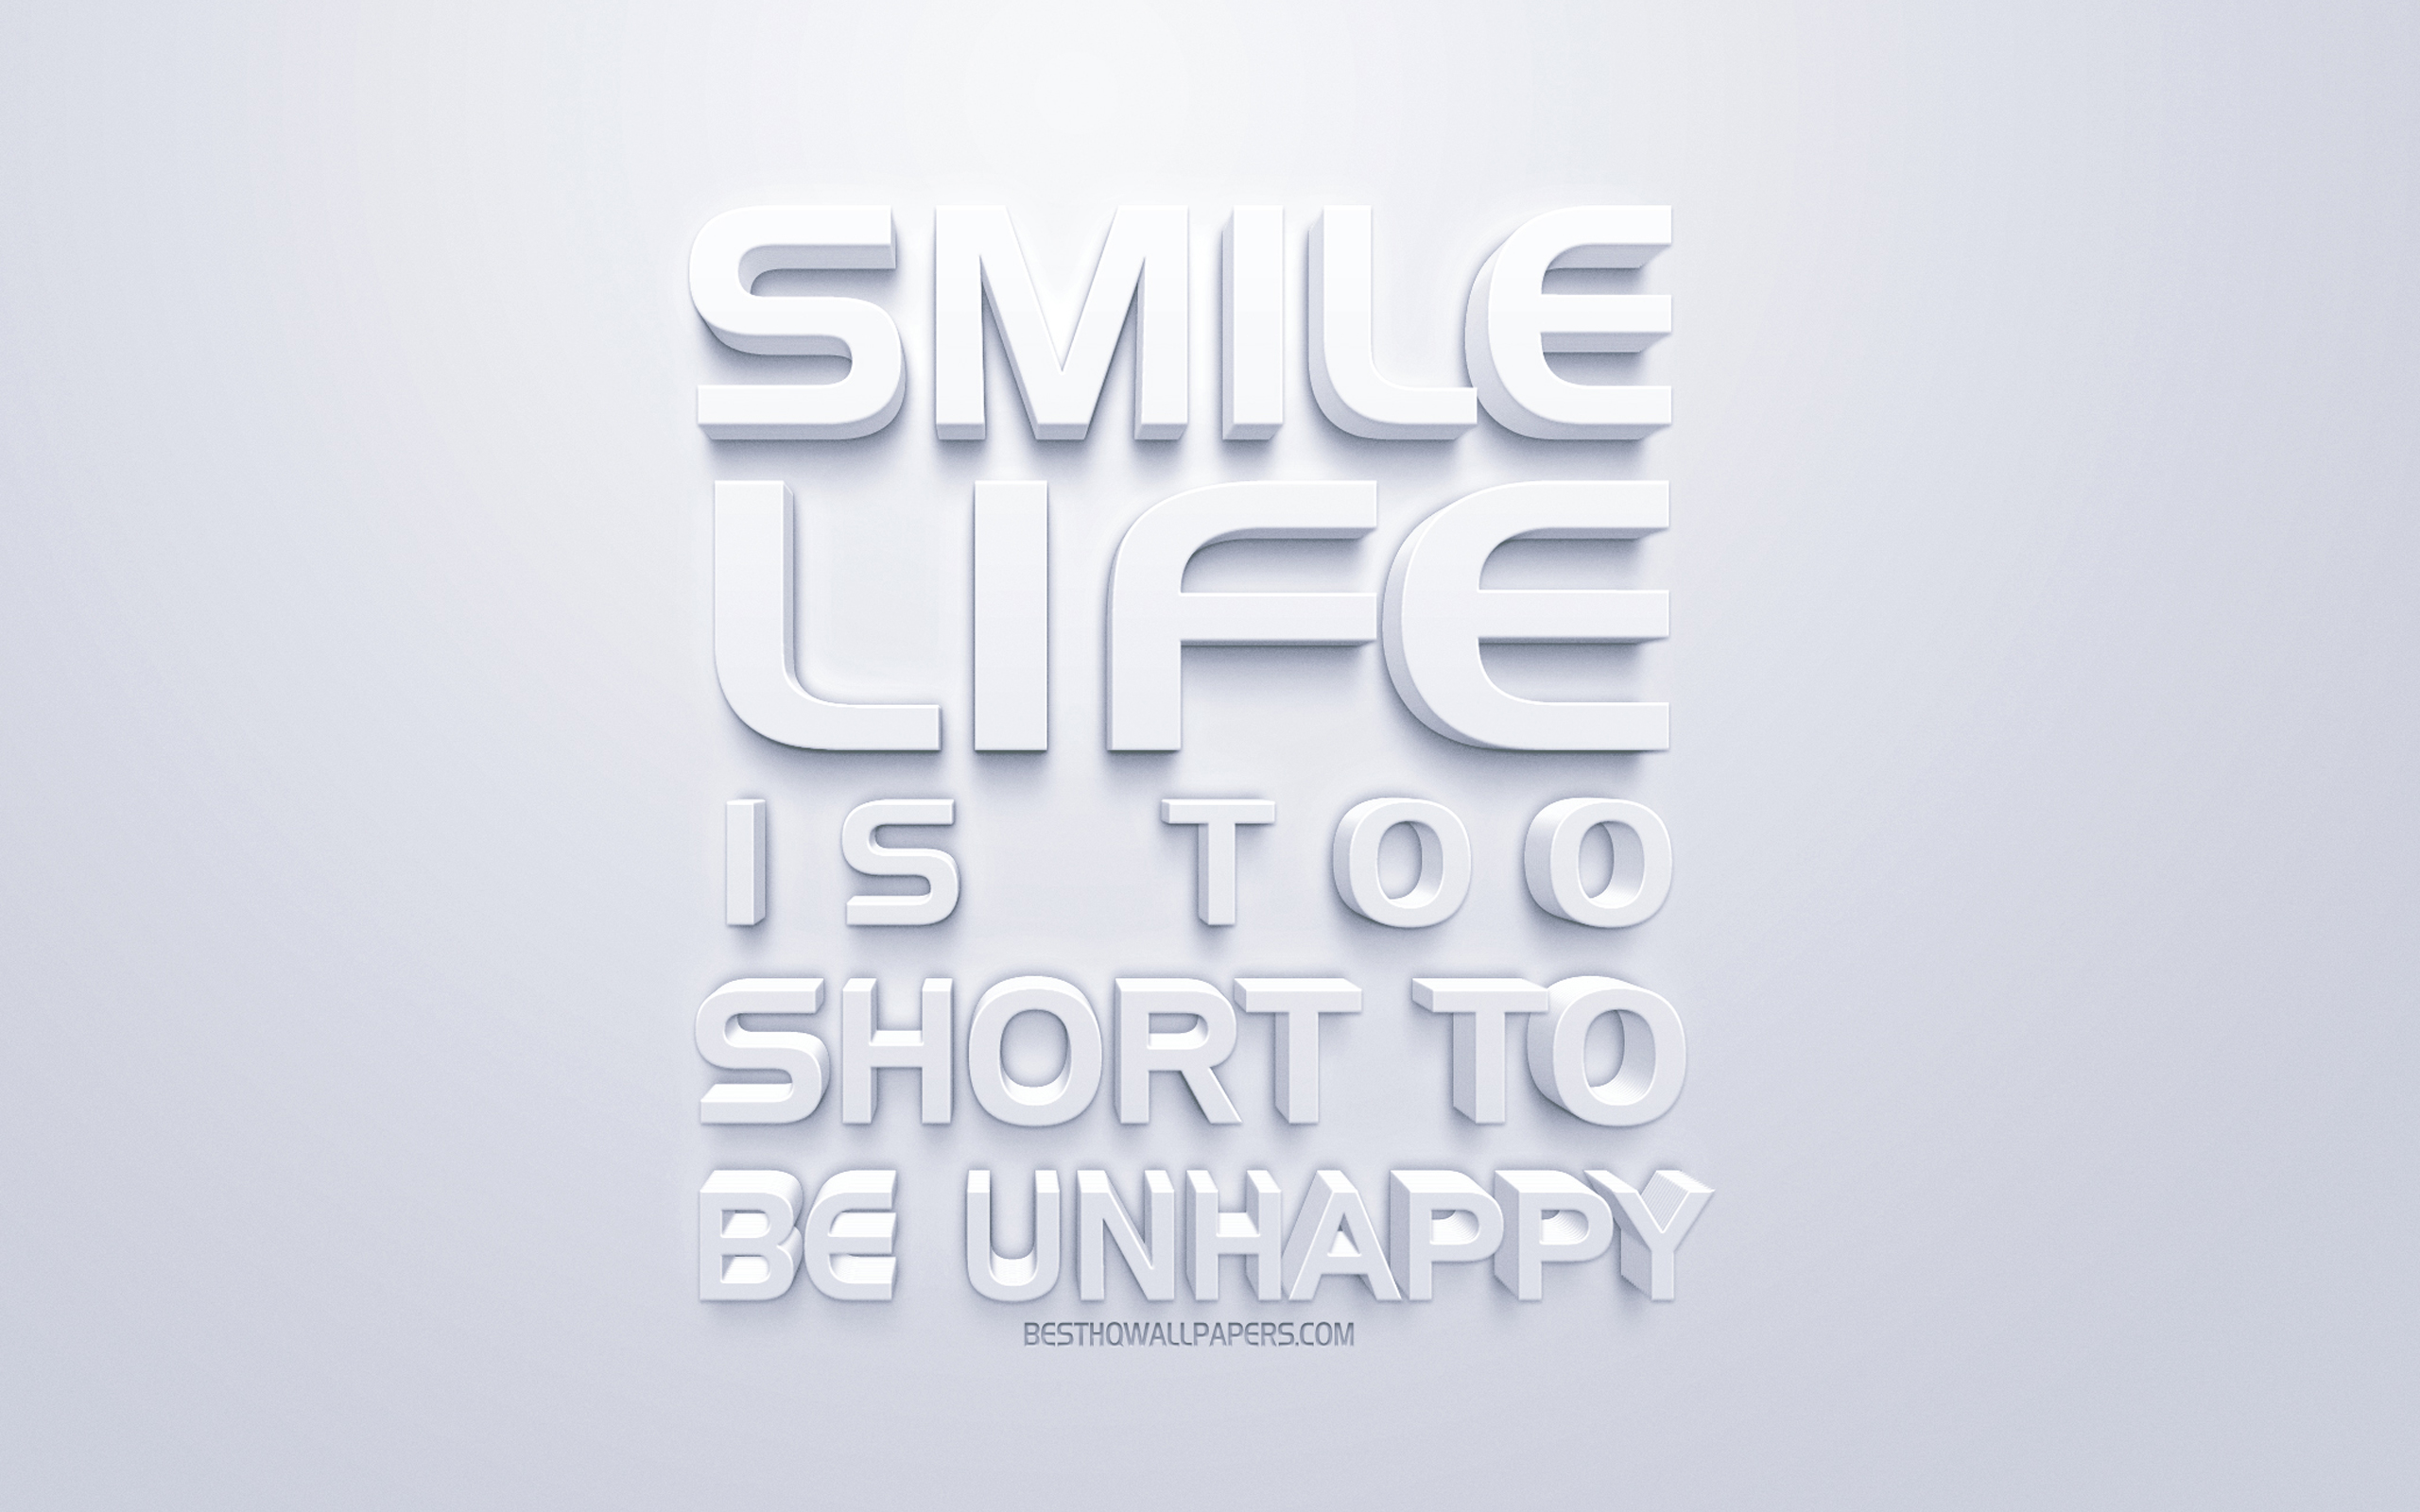 Download wallpaper Smile Life is too short to be unhappy, positive quotes, white 3D art, white background, inspiration for desktop with resolution 2560x1600. High Quality HD picture wallpaper